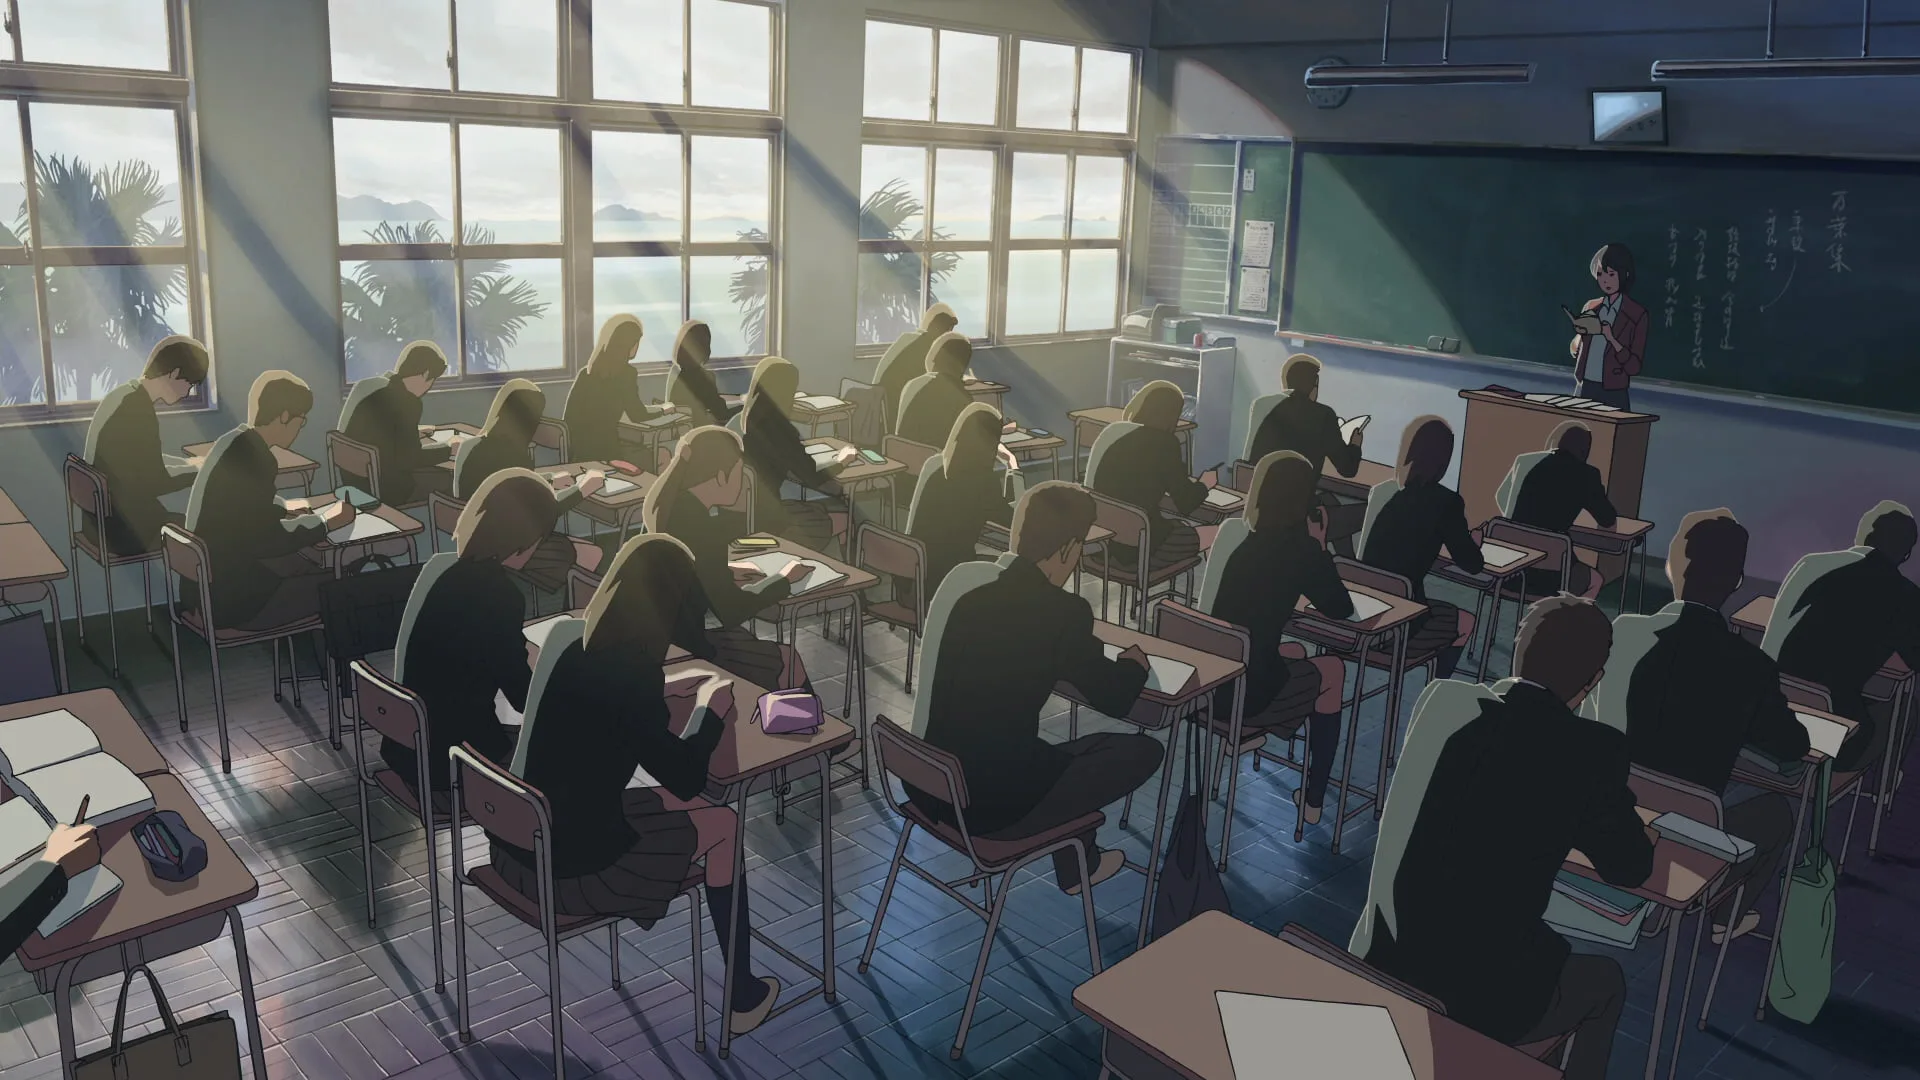 High school kids make up one of the largest percentages of Anime viewers.